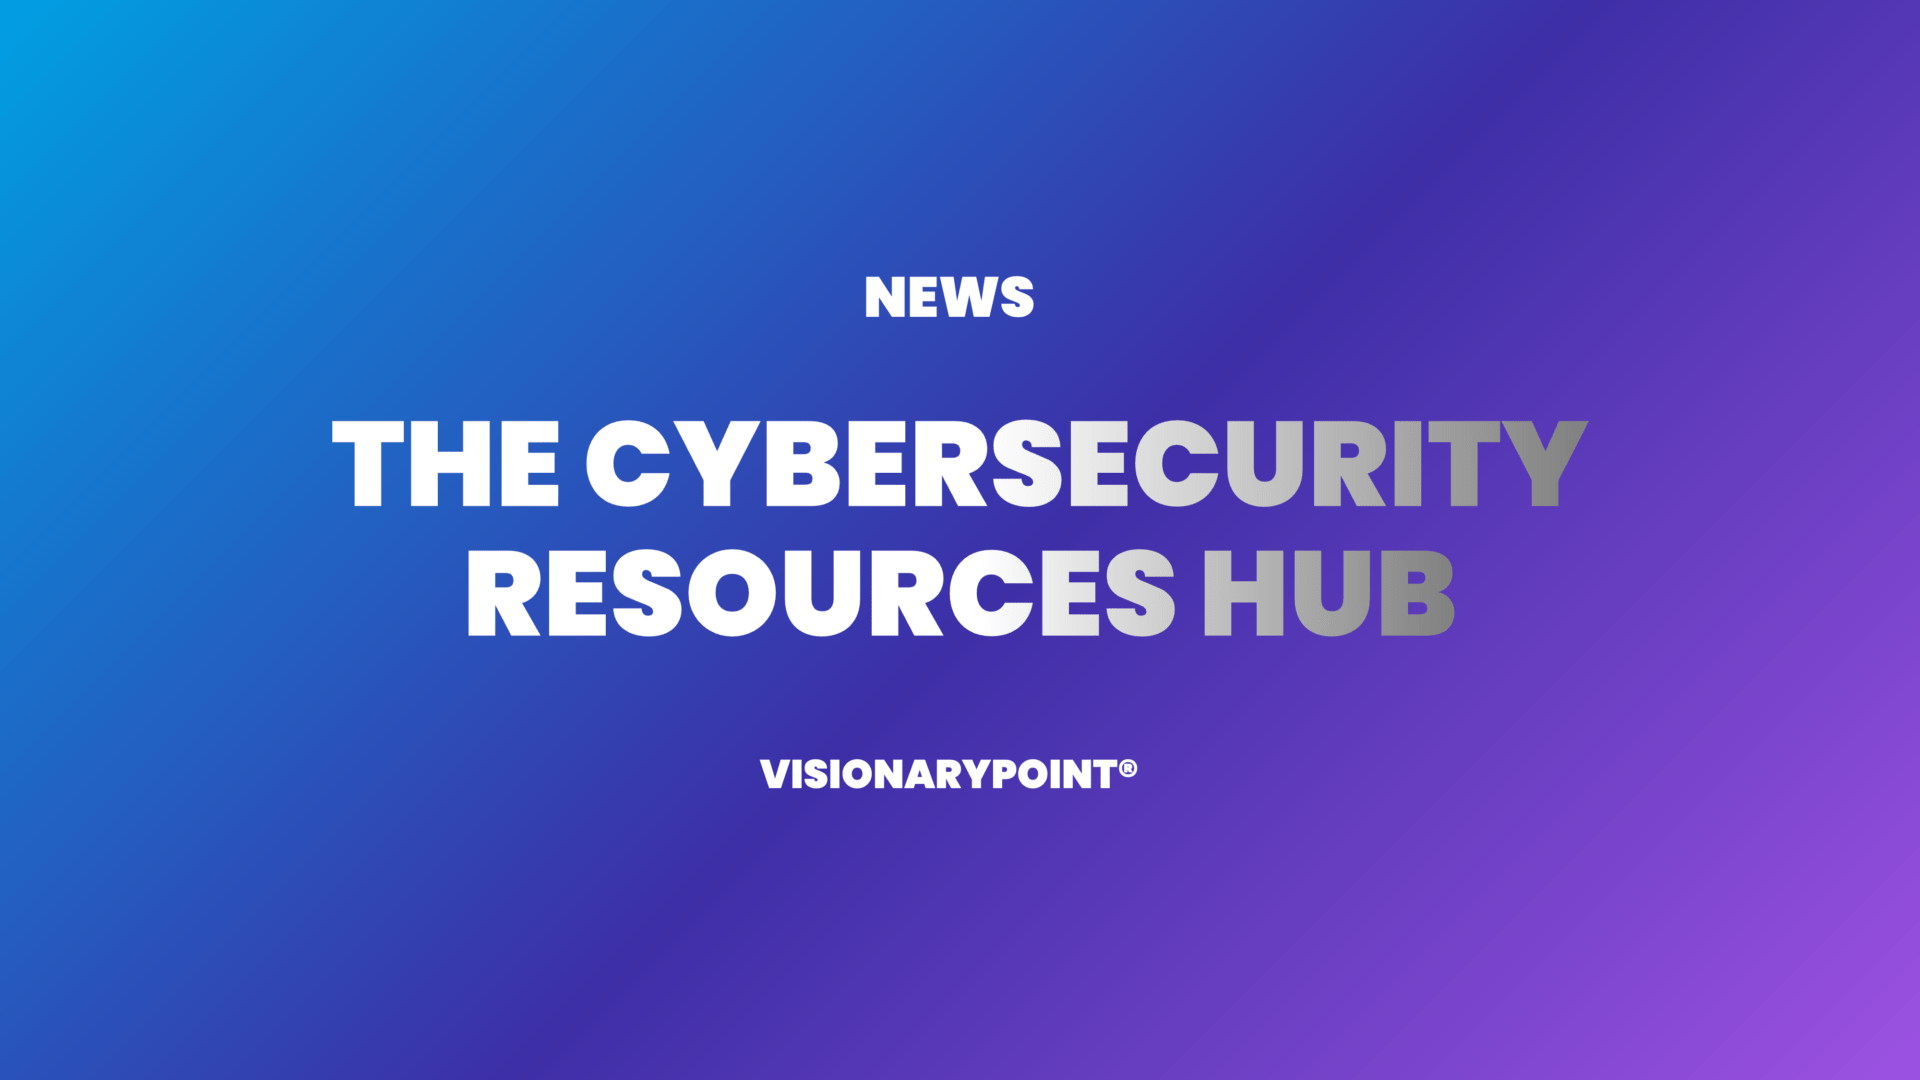 VisionaryPoint THE CYBERSECURITY RESOURCES HUB